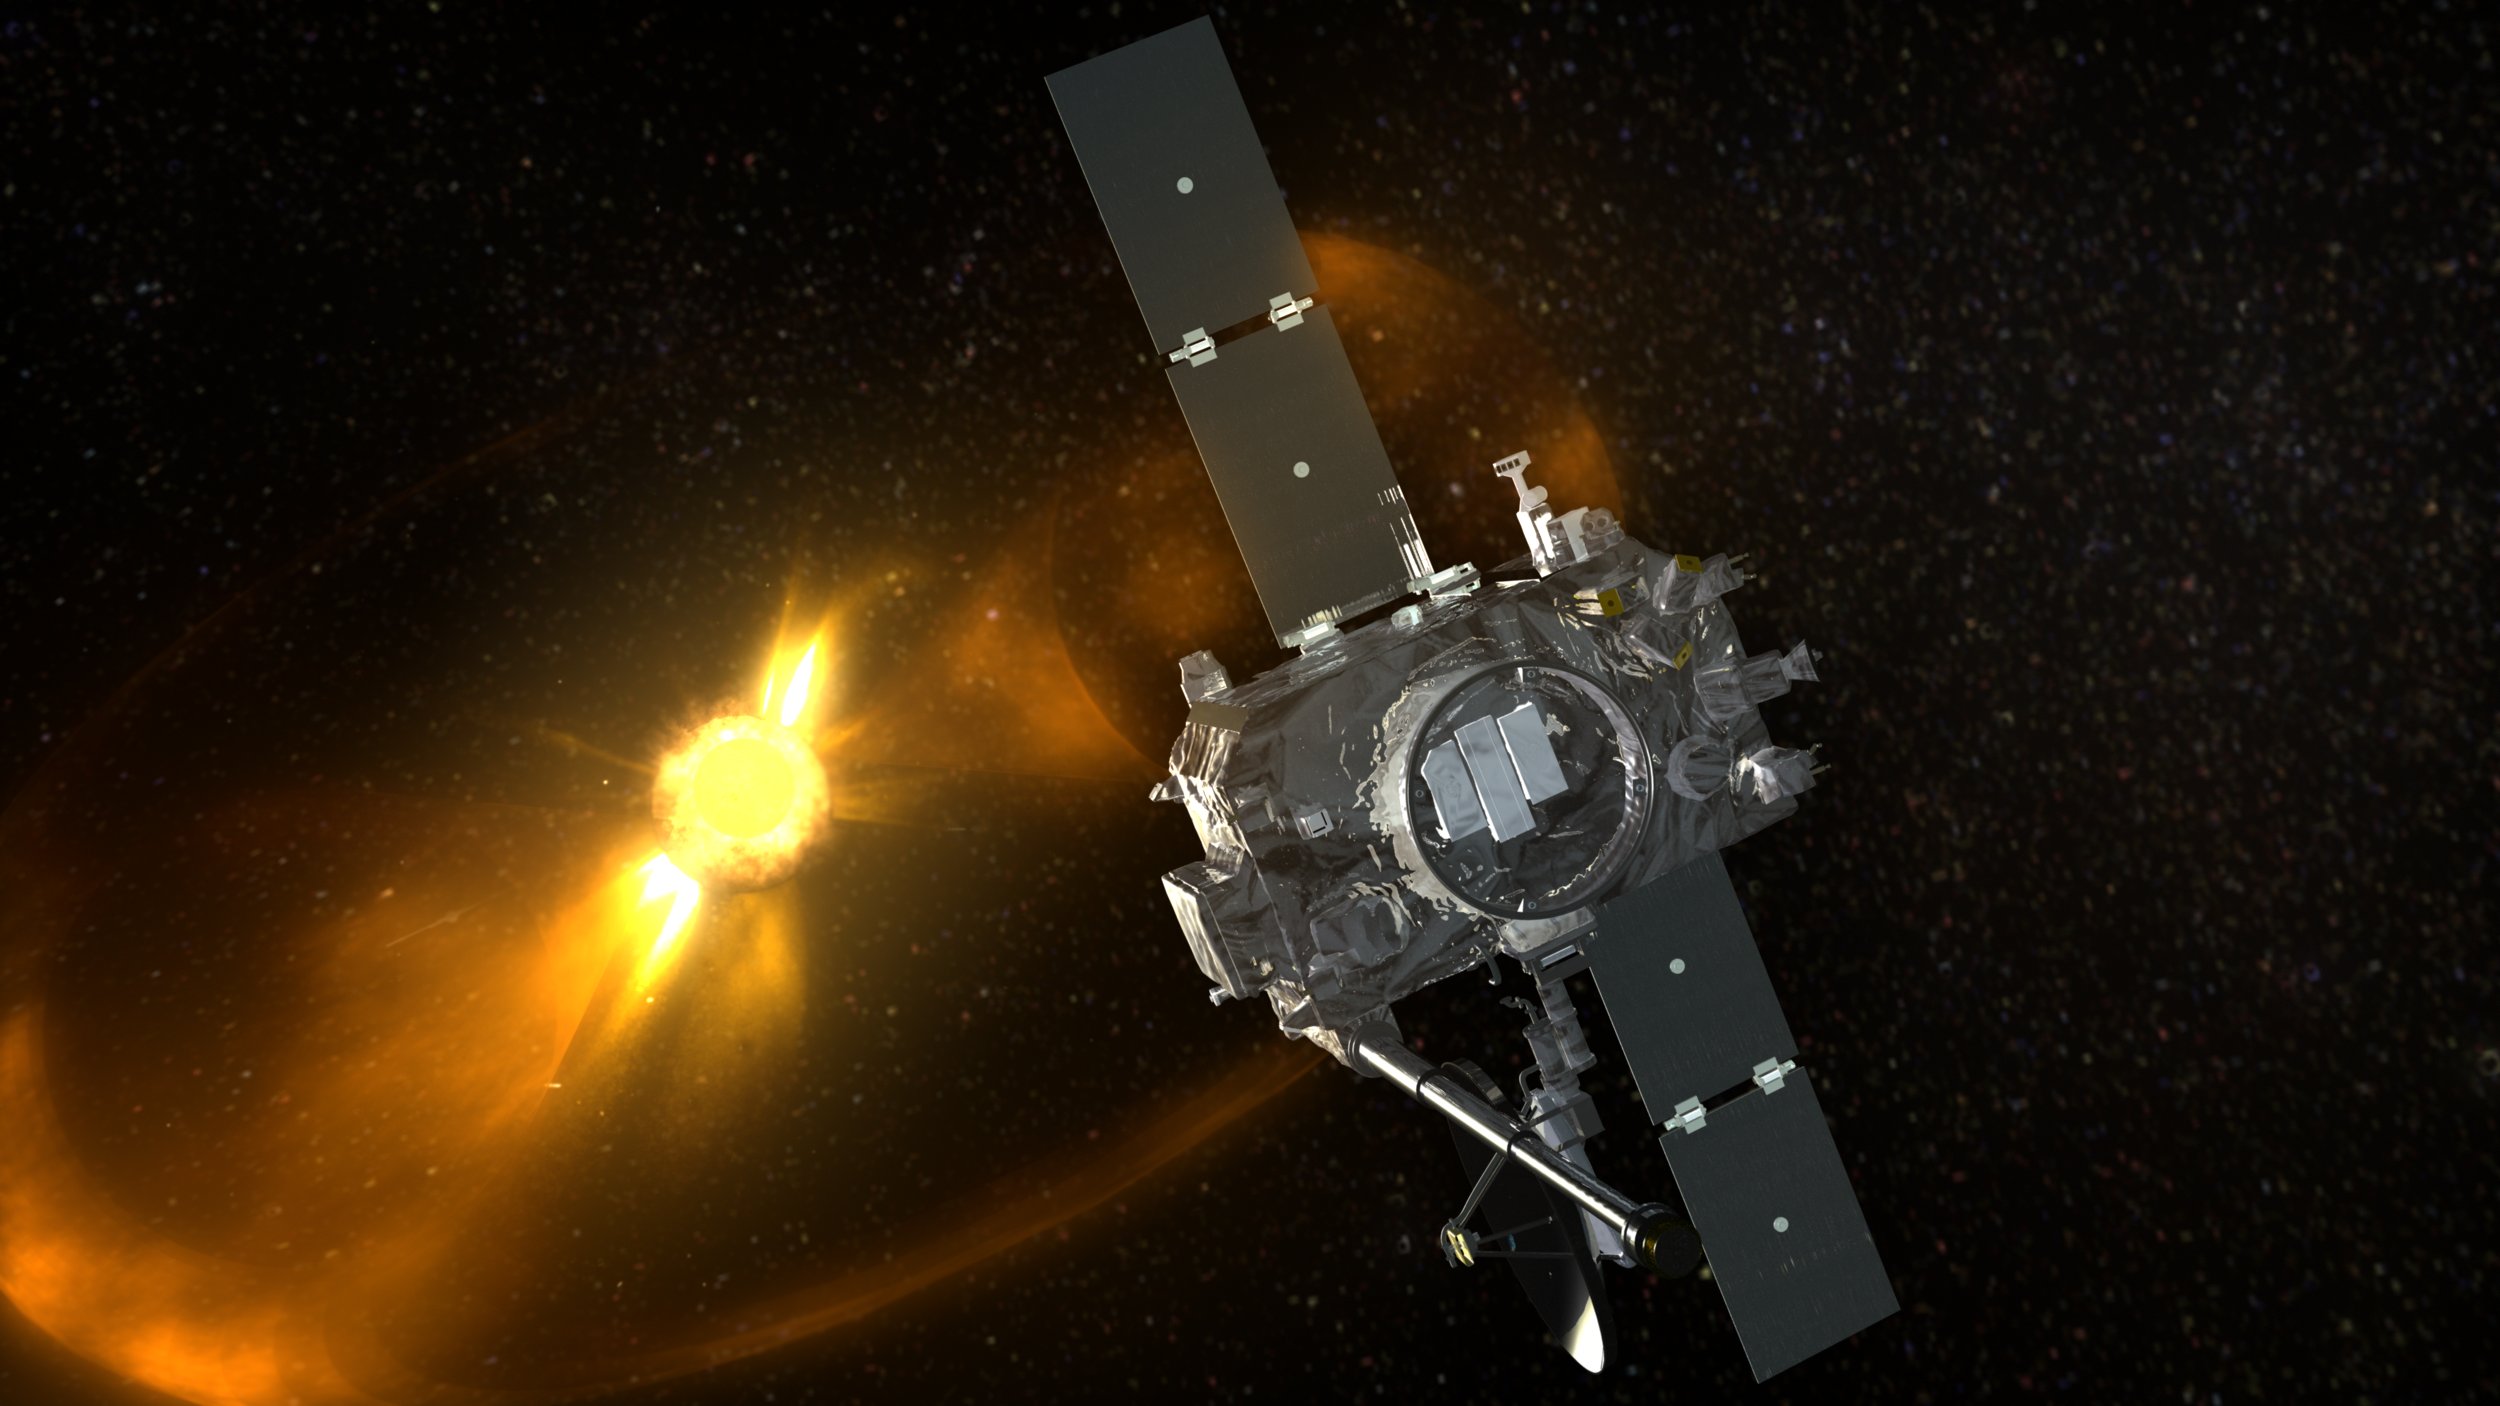 Artist's concept showing CME sweeping past STEREO